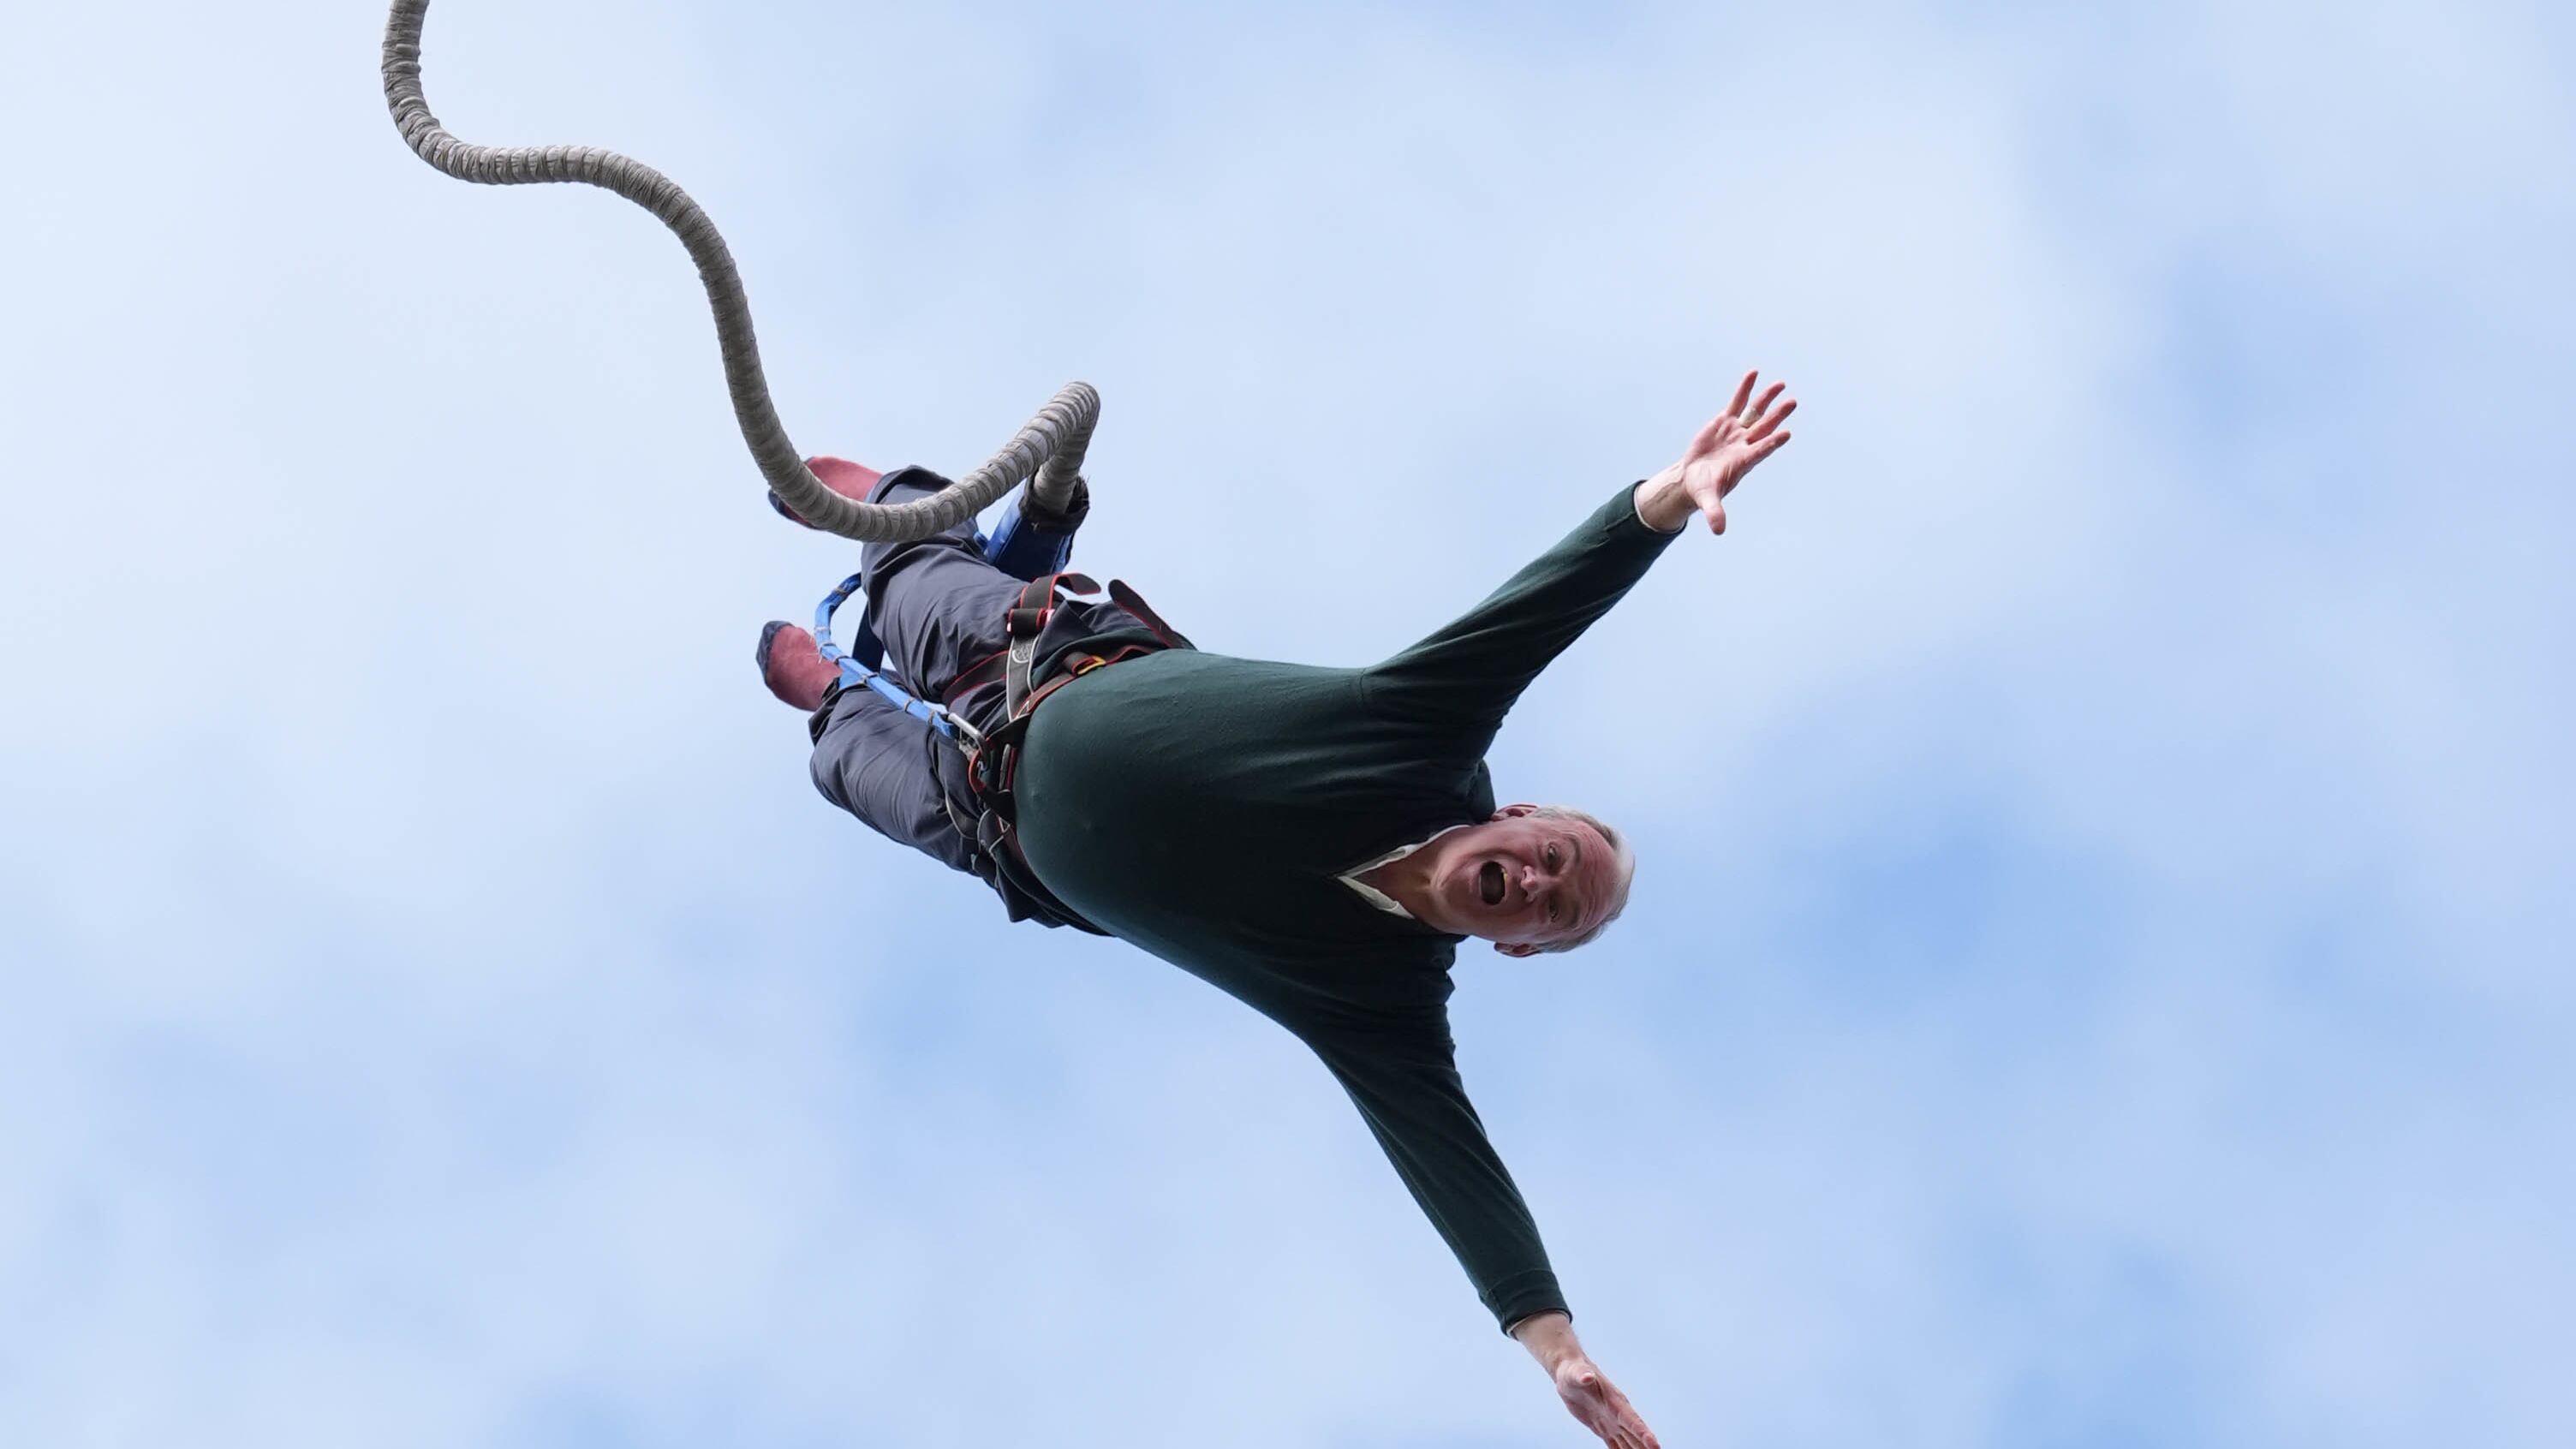 Liberal Democrat leader Sir Ed Davey was hoping for a bounce in the polls after taking part in a bungee jump during a visit to Eastbourne Borough Football Club in East Sussex